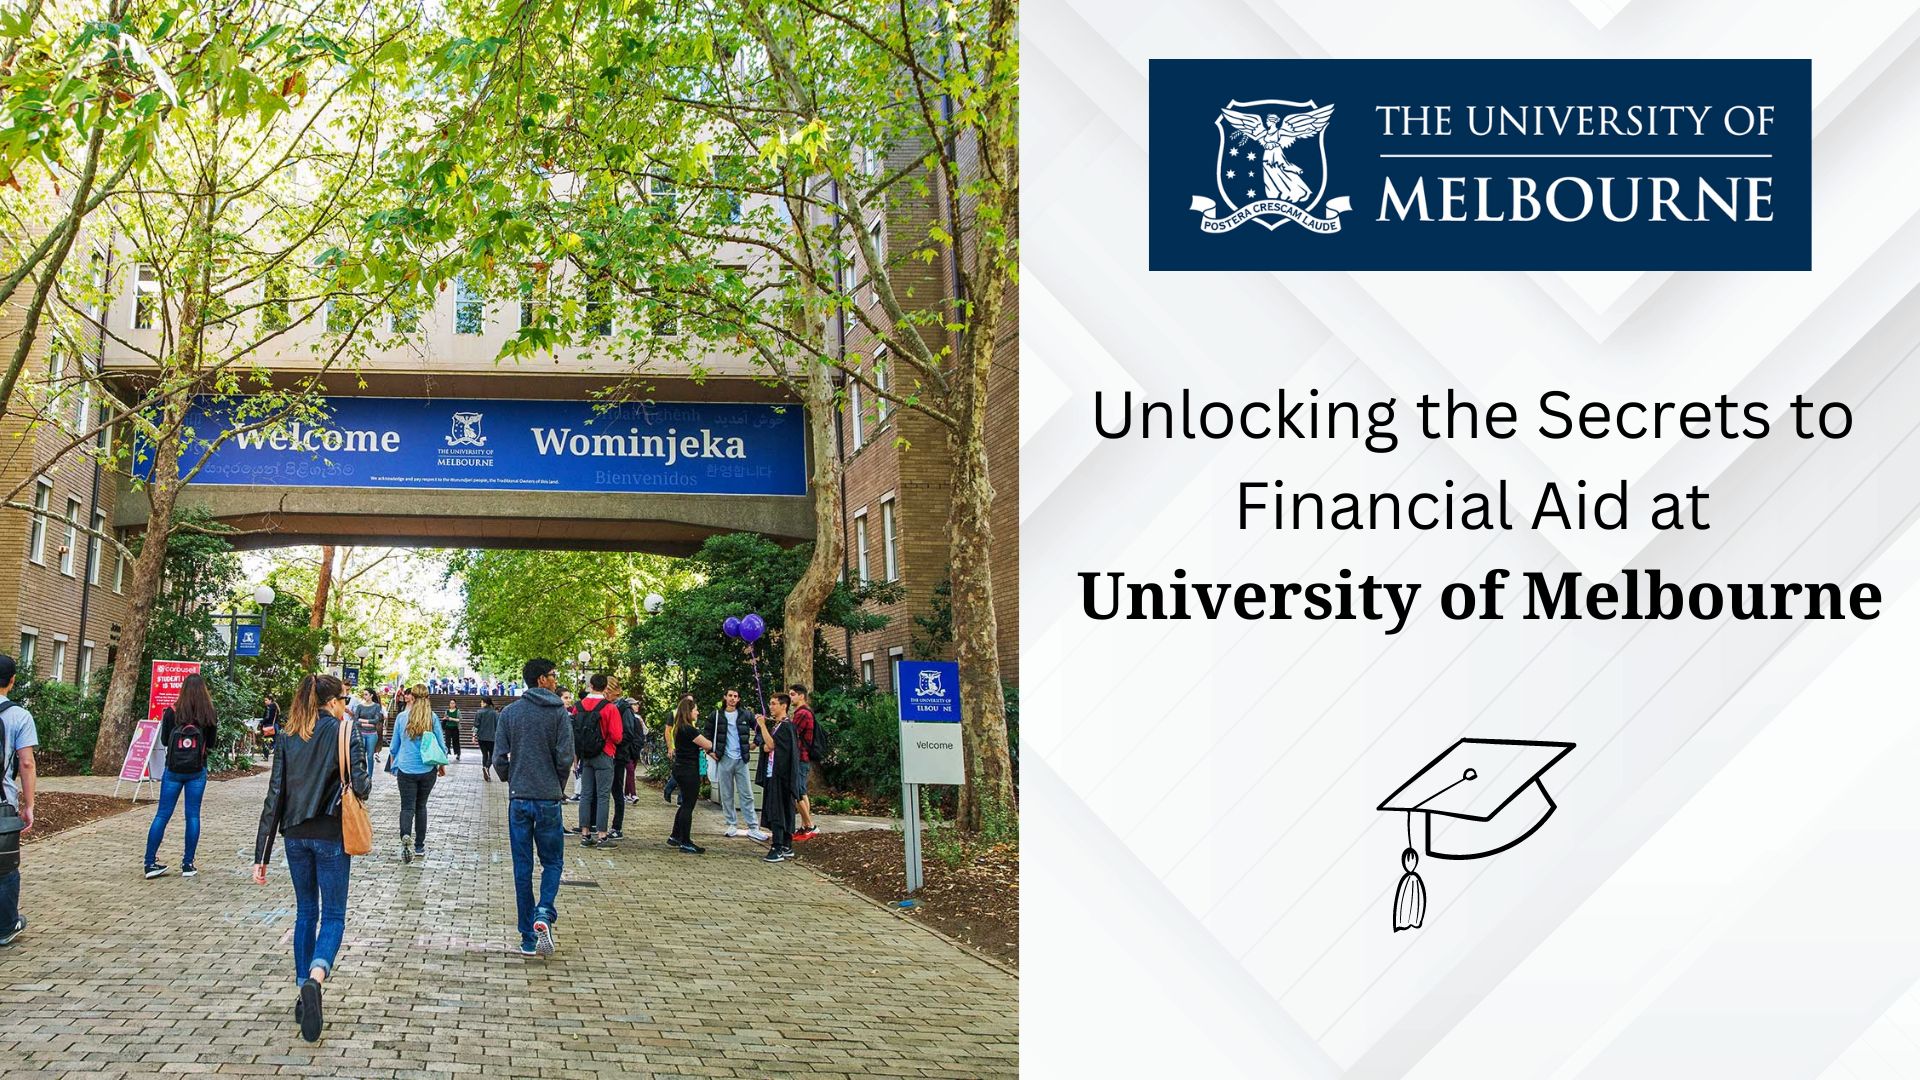 Unlocking the Secrets to Financial Aid at University of Melbourne